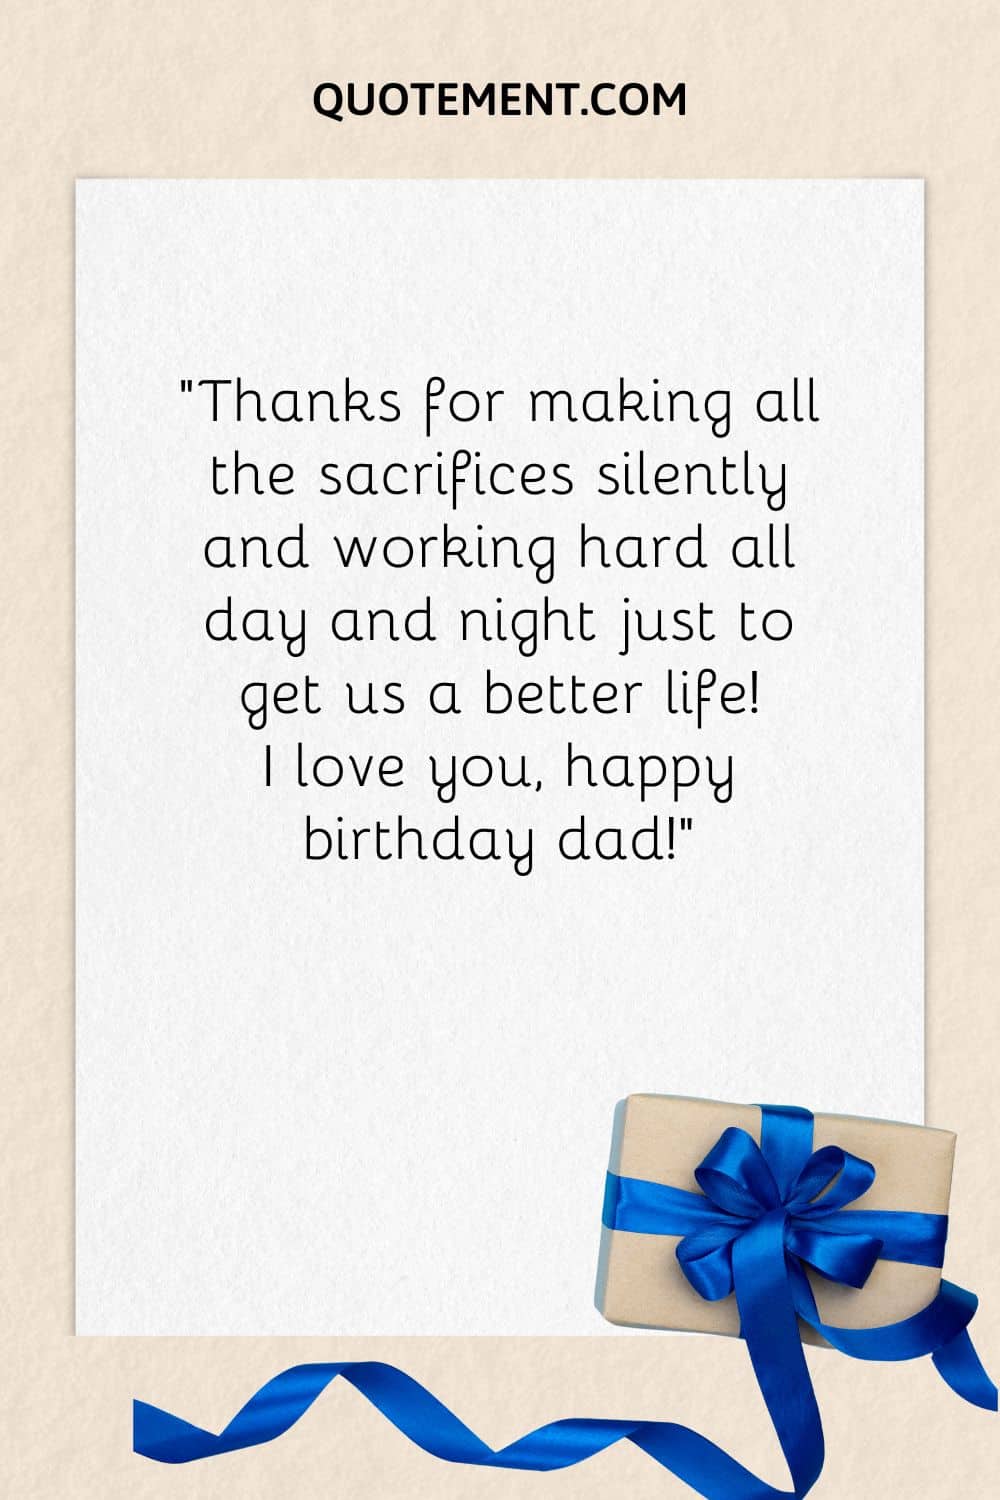 “Thanks for making all the sacrifices silently and working hard all day and night just to get us a better life! I love you, happy birthday dad!”